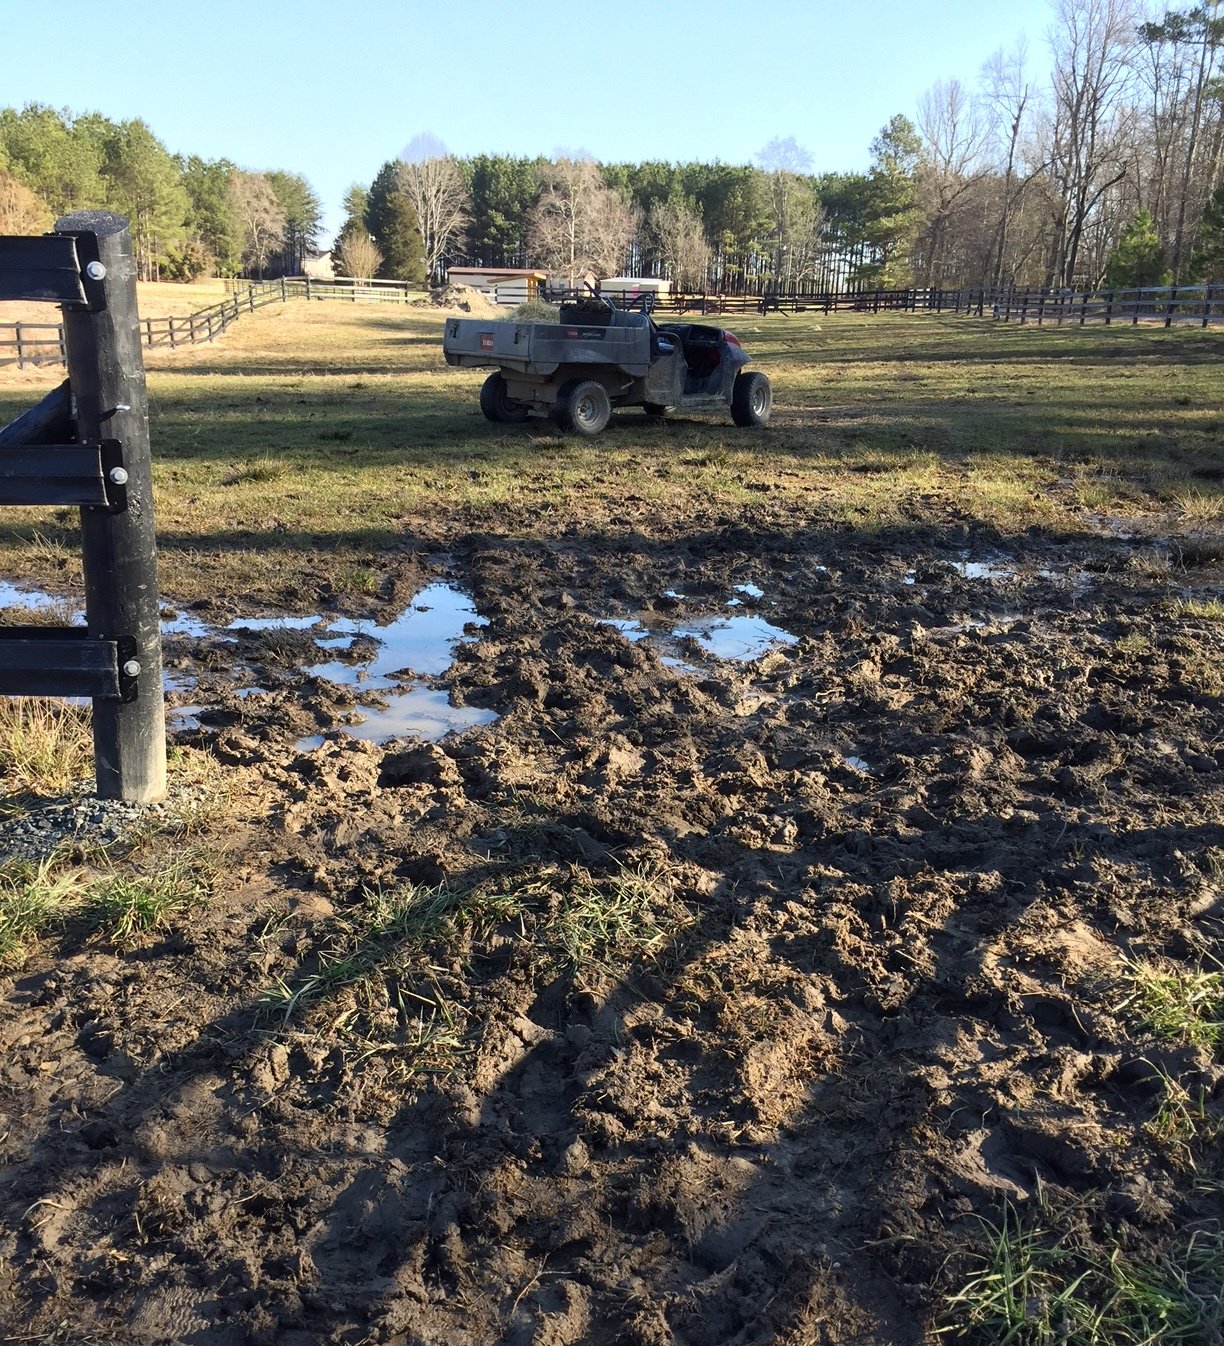 Mud and tire tracks through a gate to a pasture